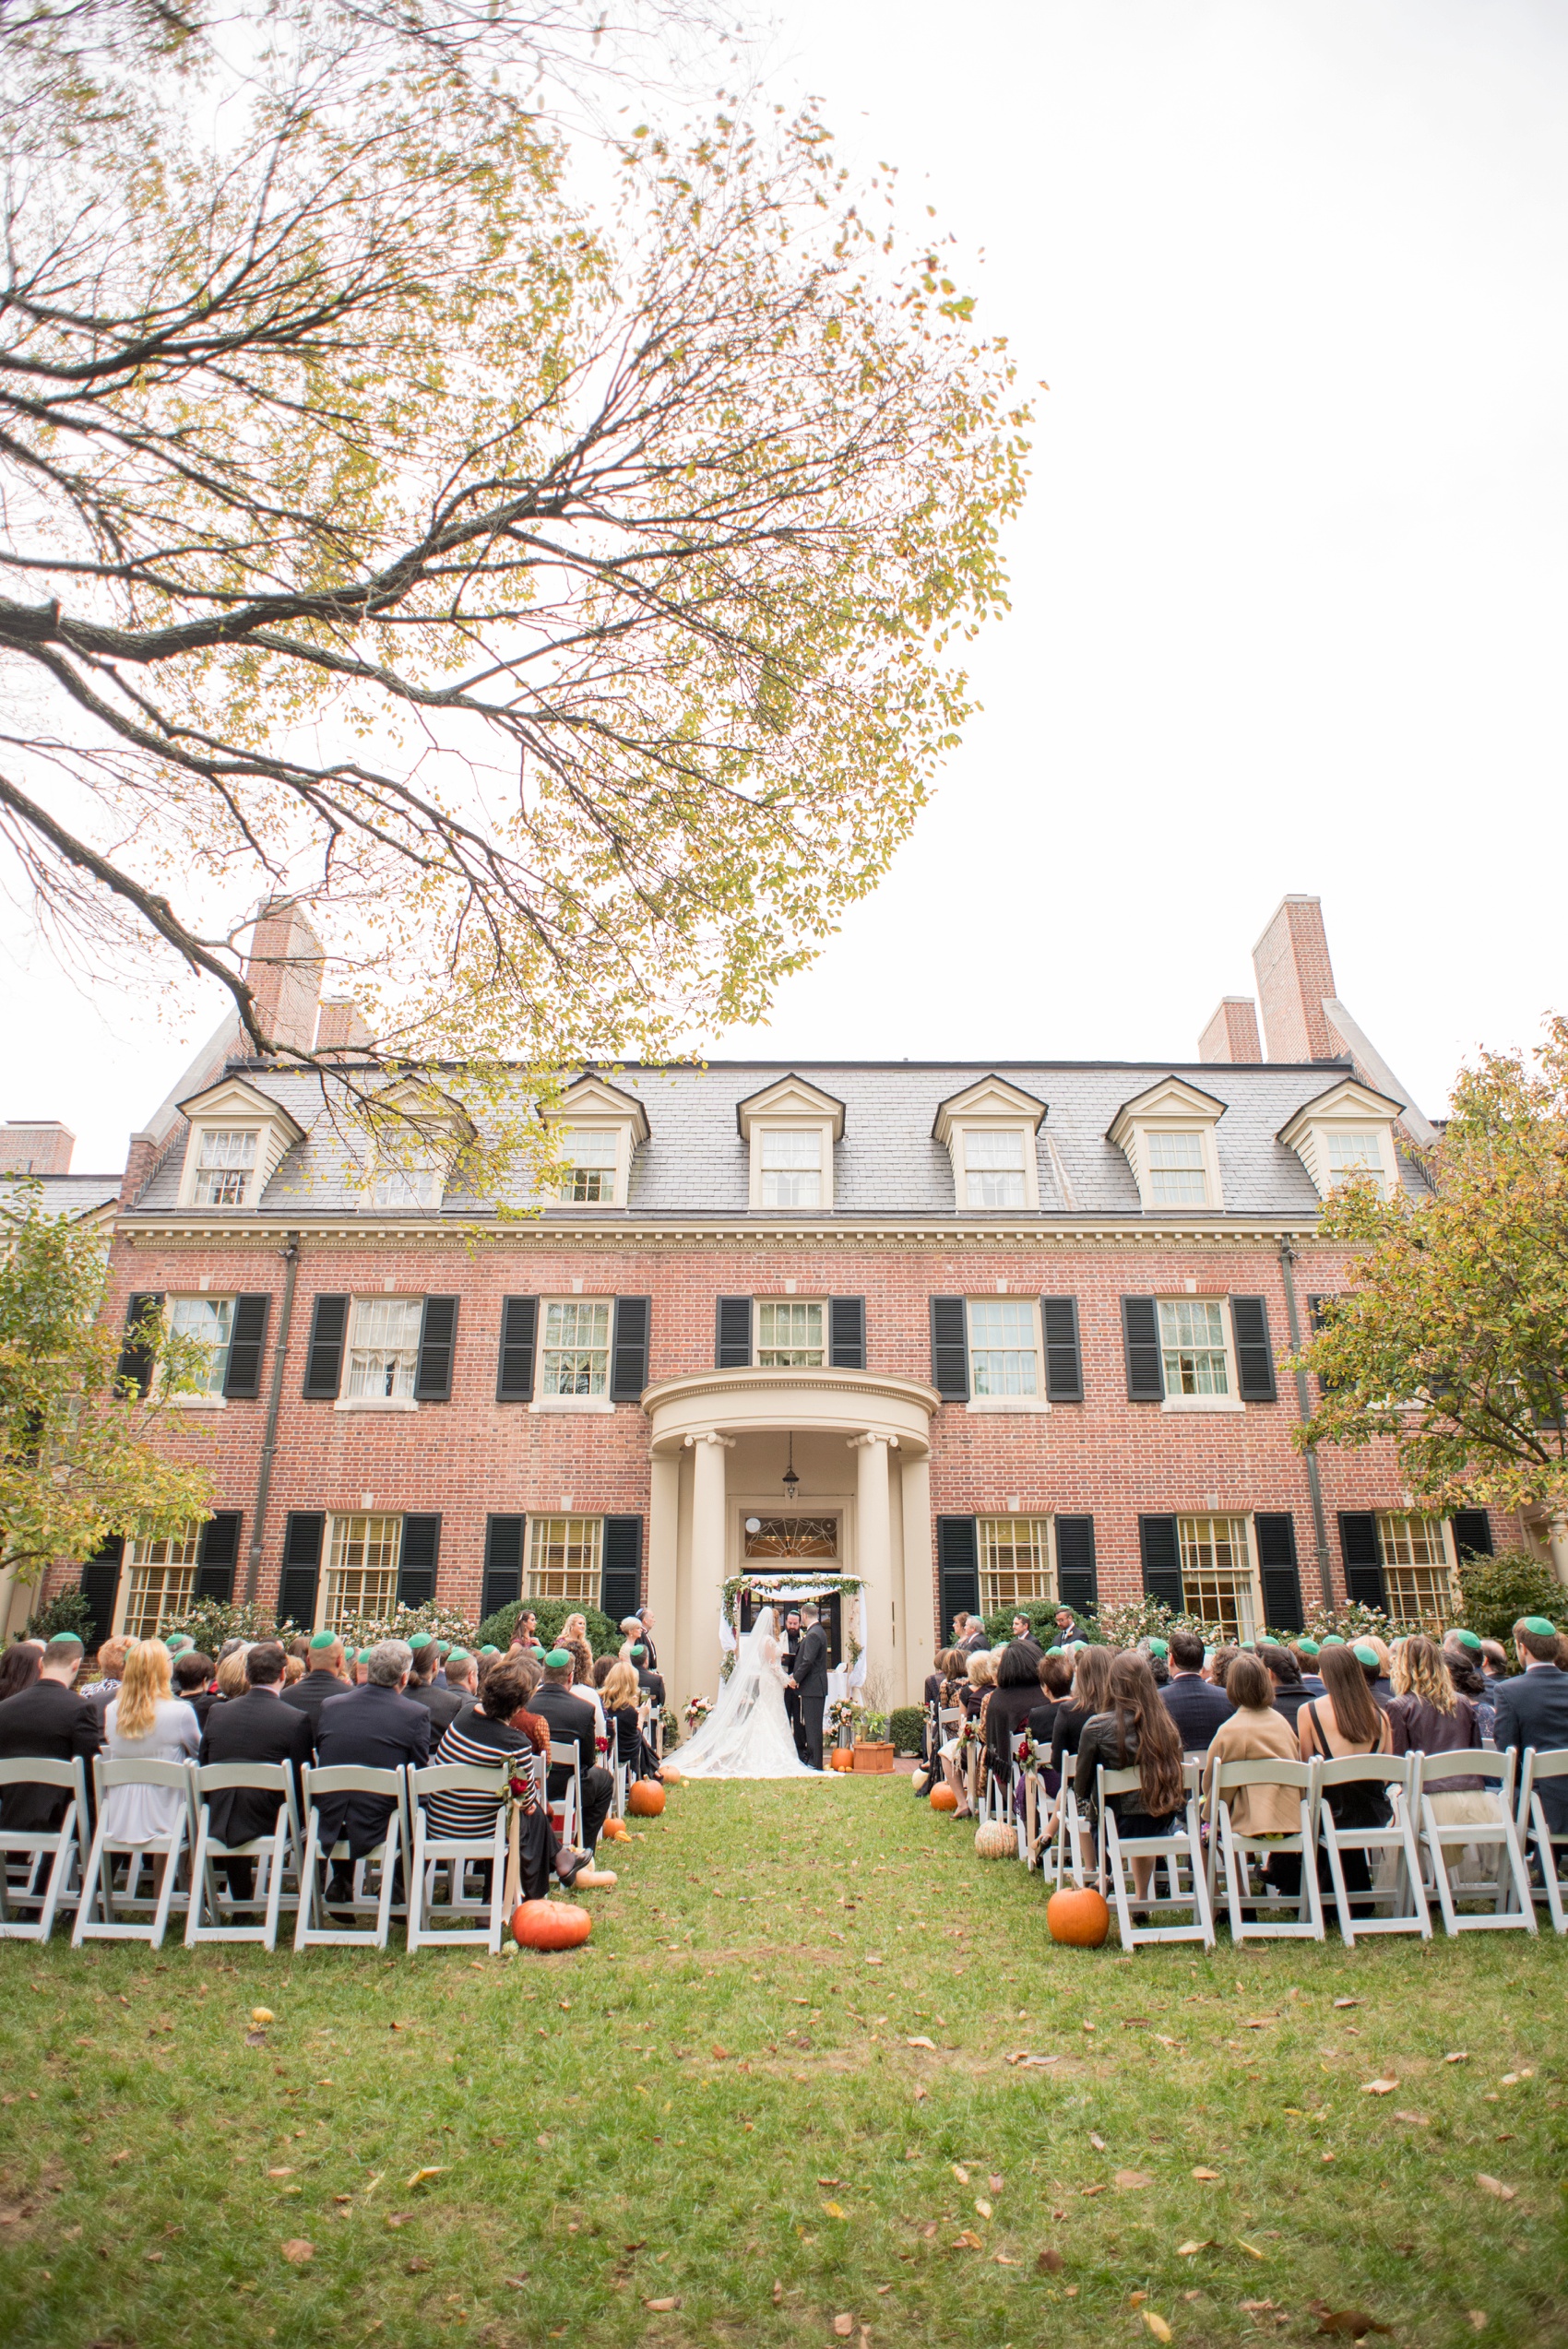 The Carolina Inn wedding photos by Mikkel Paige Photography, Raleigh wedding photographer. Planning by A Swanky Affair and flowers by Tre Bella for a fall pumpkin Halloween inspired outdoor ceremony.